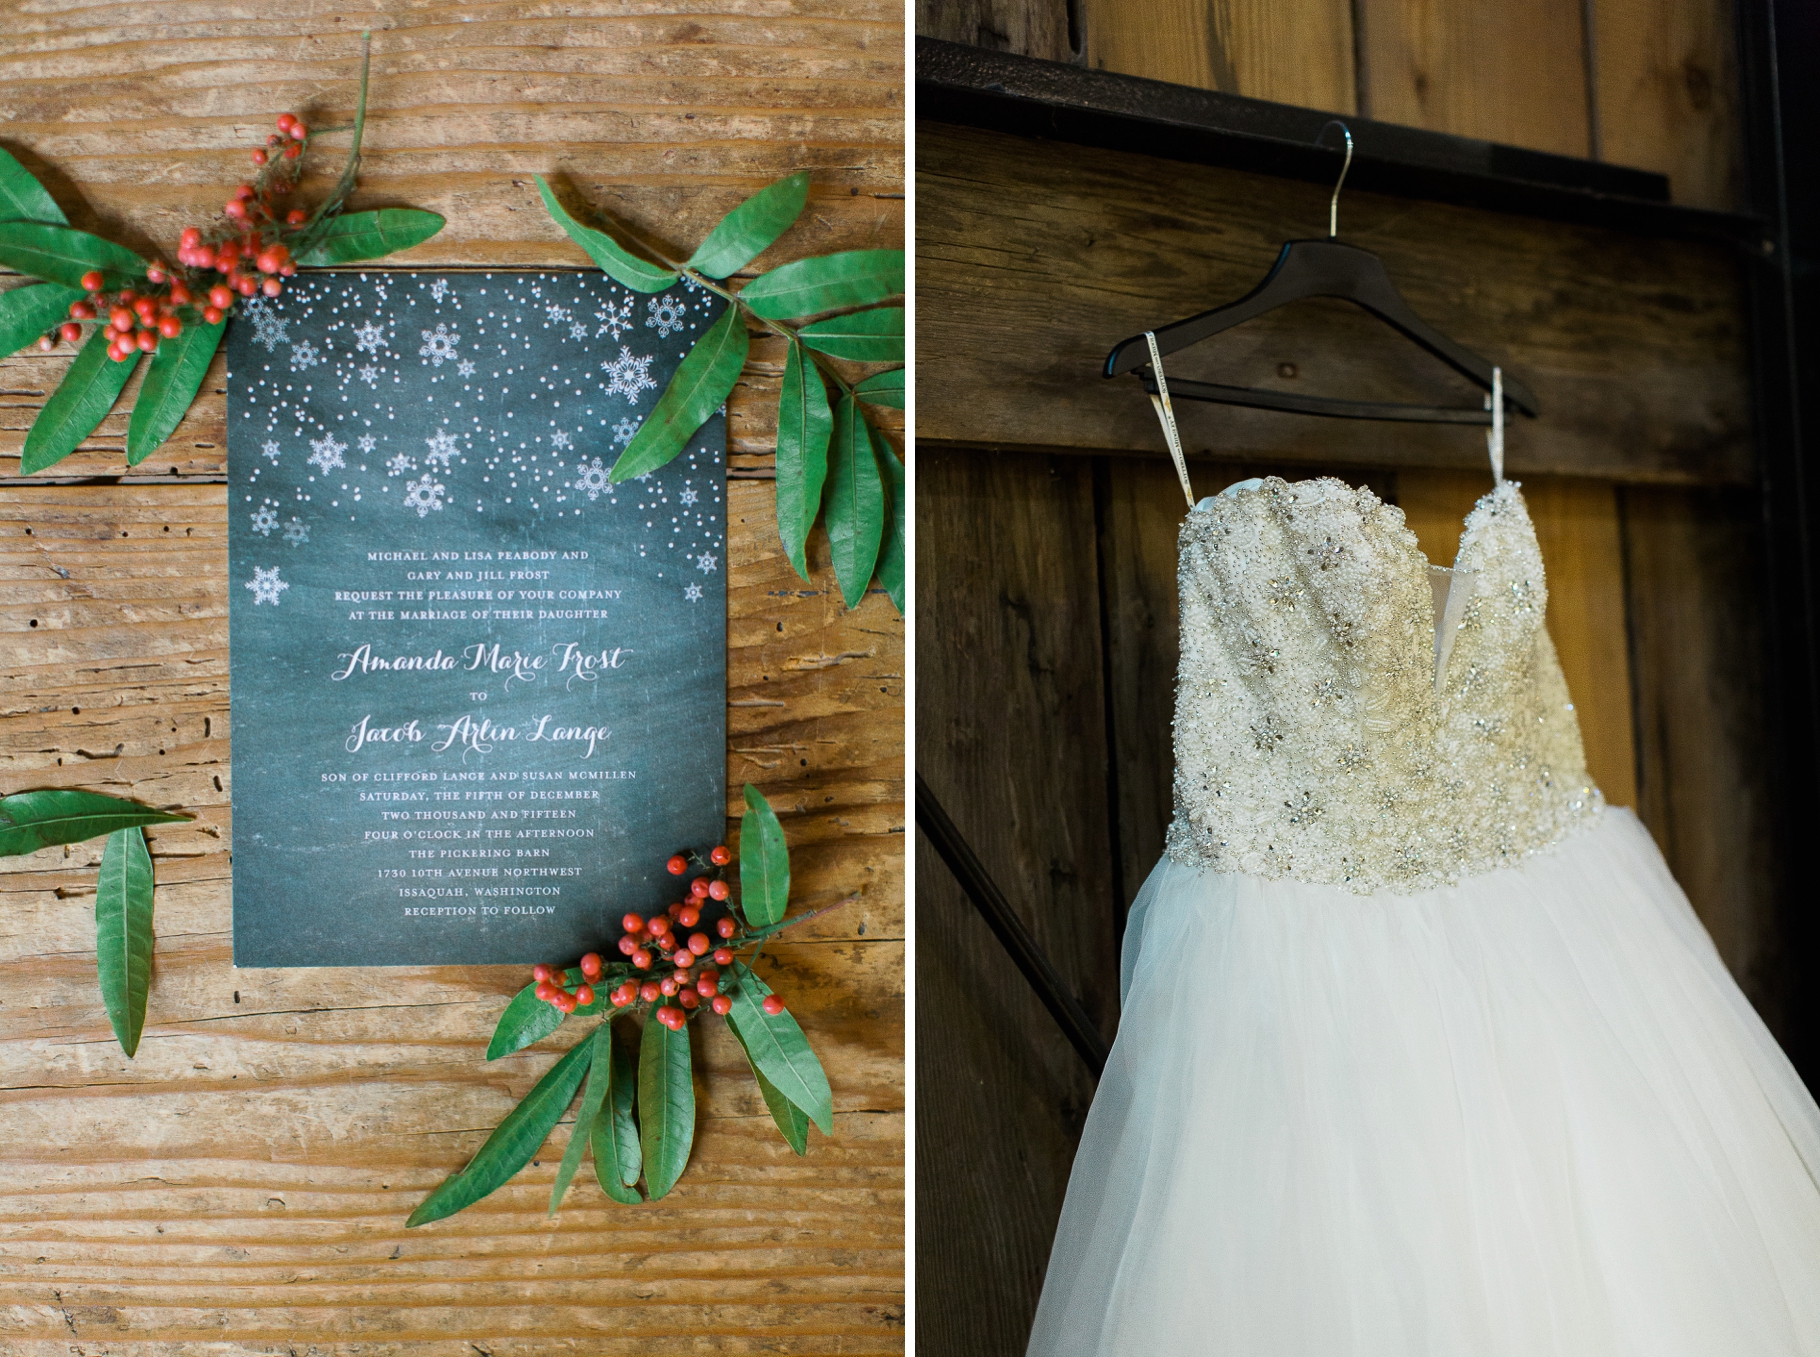 1-Invitations-Snowflakes-Bridal-Gown-Pickering-Barn-Issaquah-Winter-Wedding-Photographer-Seattle-Photography-by-Betty-Elaine